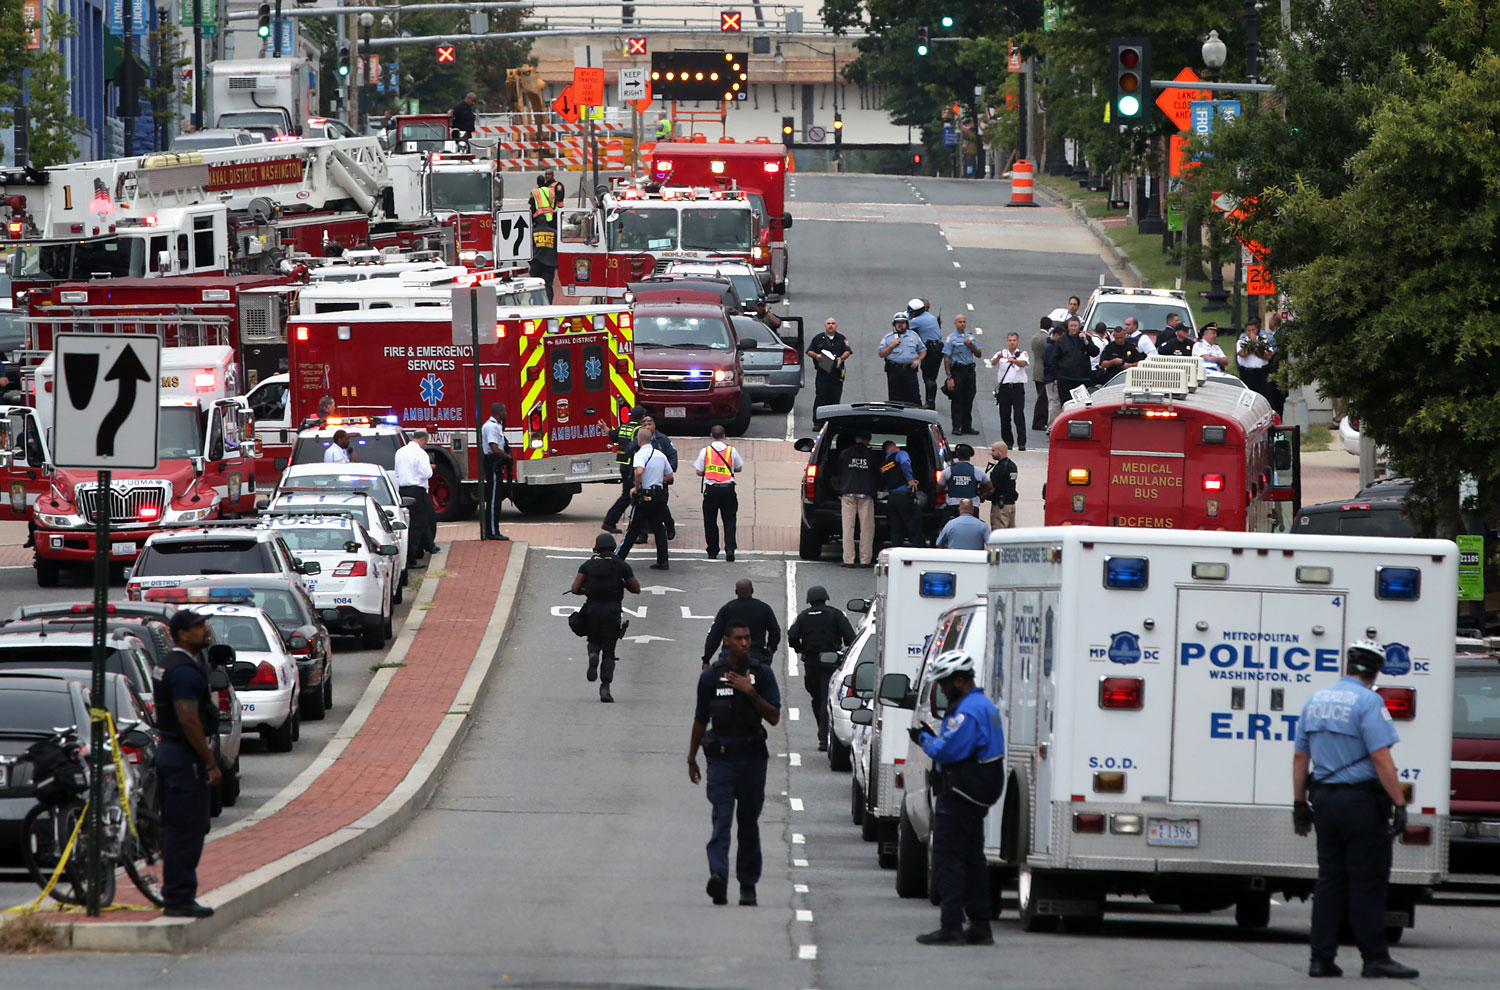 Emergency vehicles and law enforcement personnel respond to a shooting at an entrance to the Washington Navy Yard, Sept. 16, 2013 in Washington, DC. (Alex Wong—Getty Images)